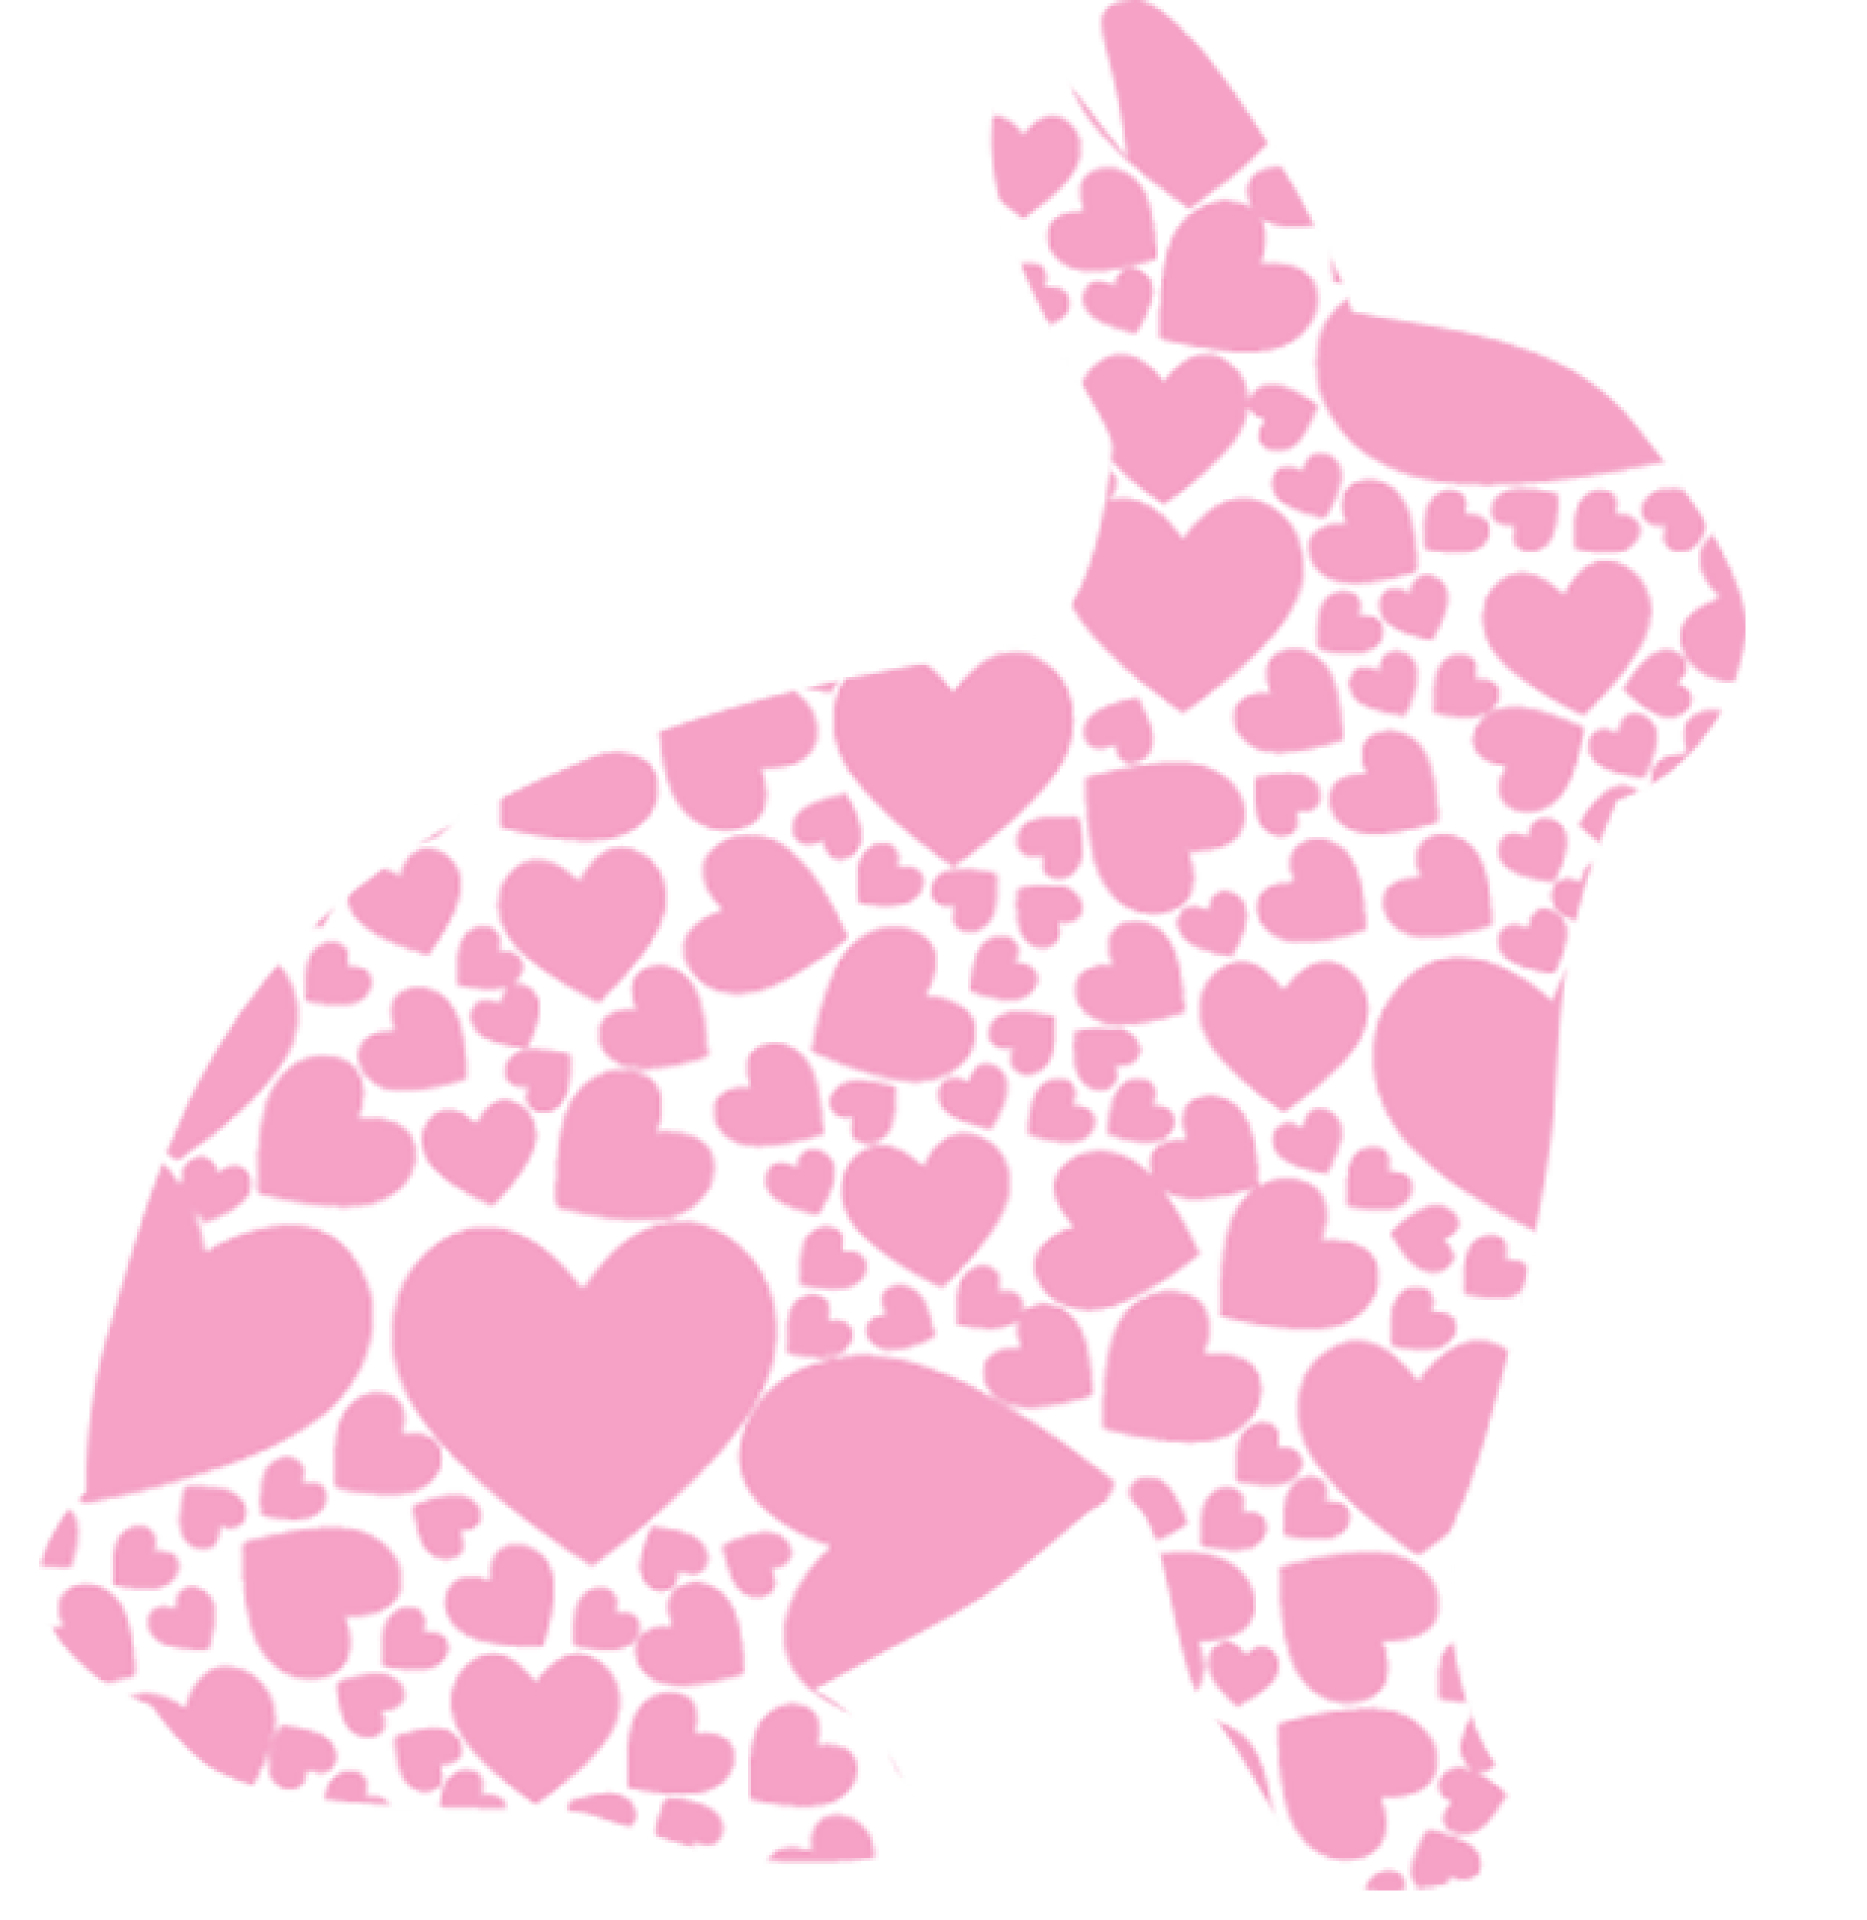 Heart-pink bunny silhouette vector